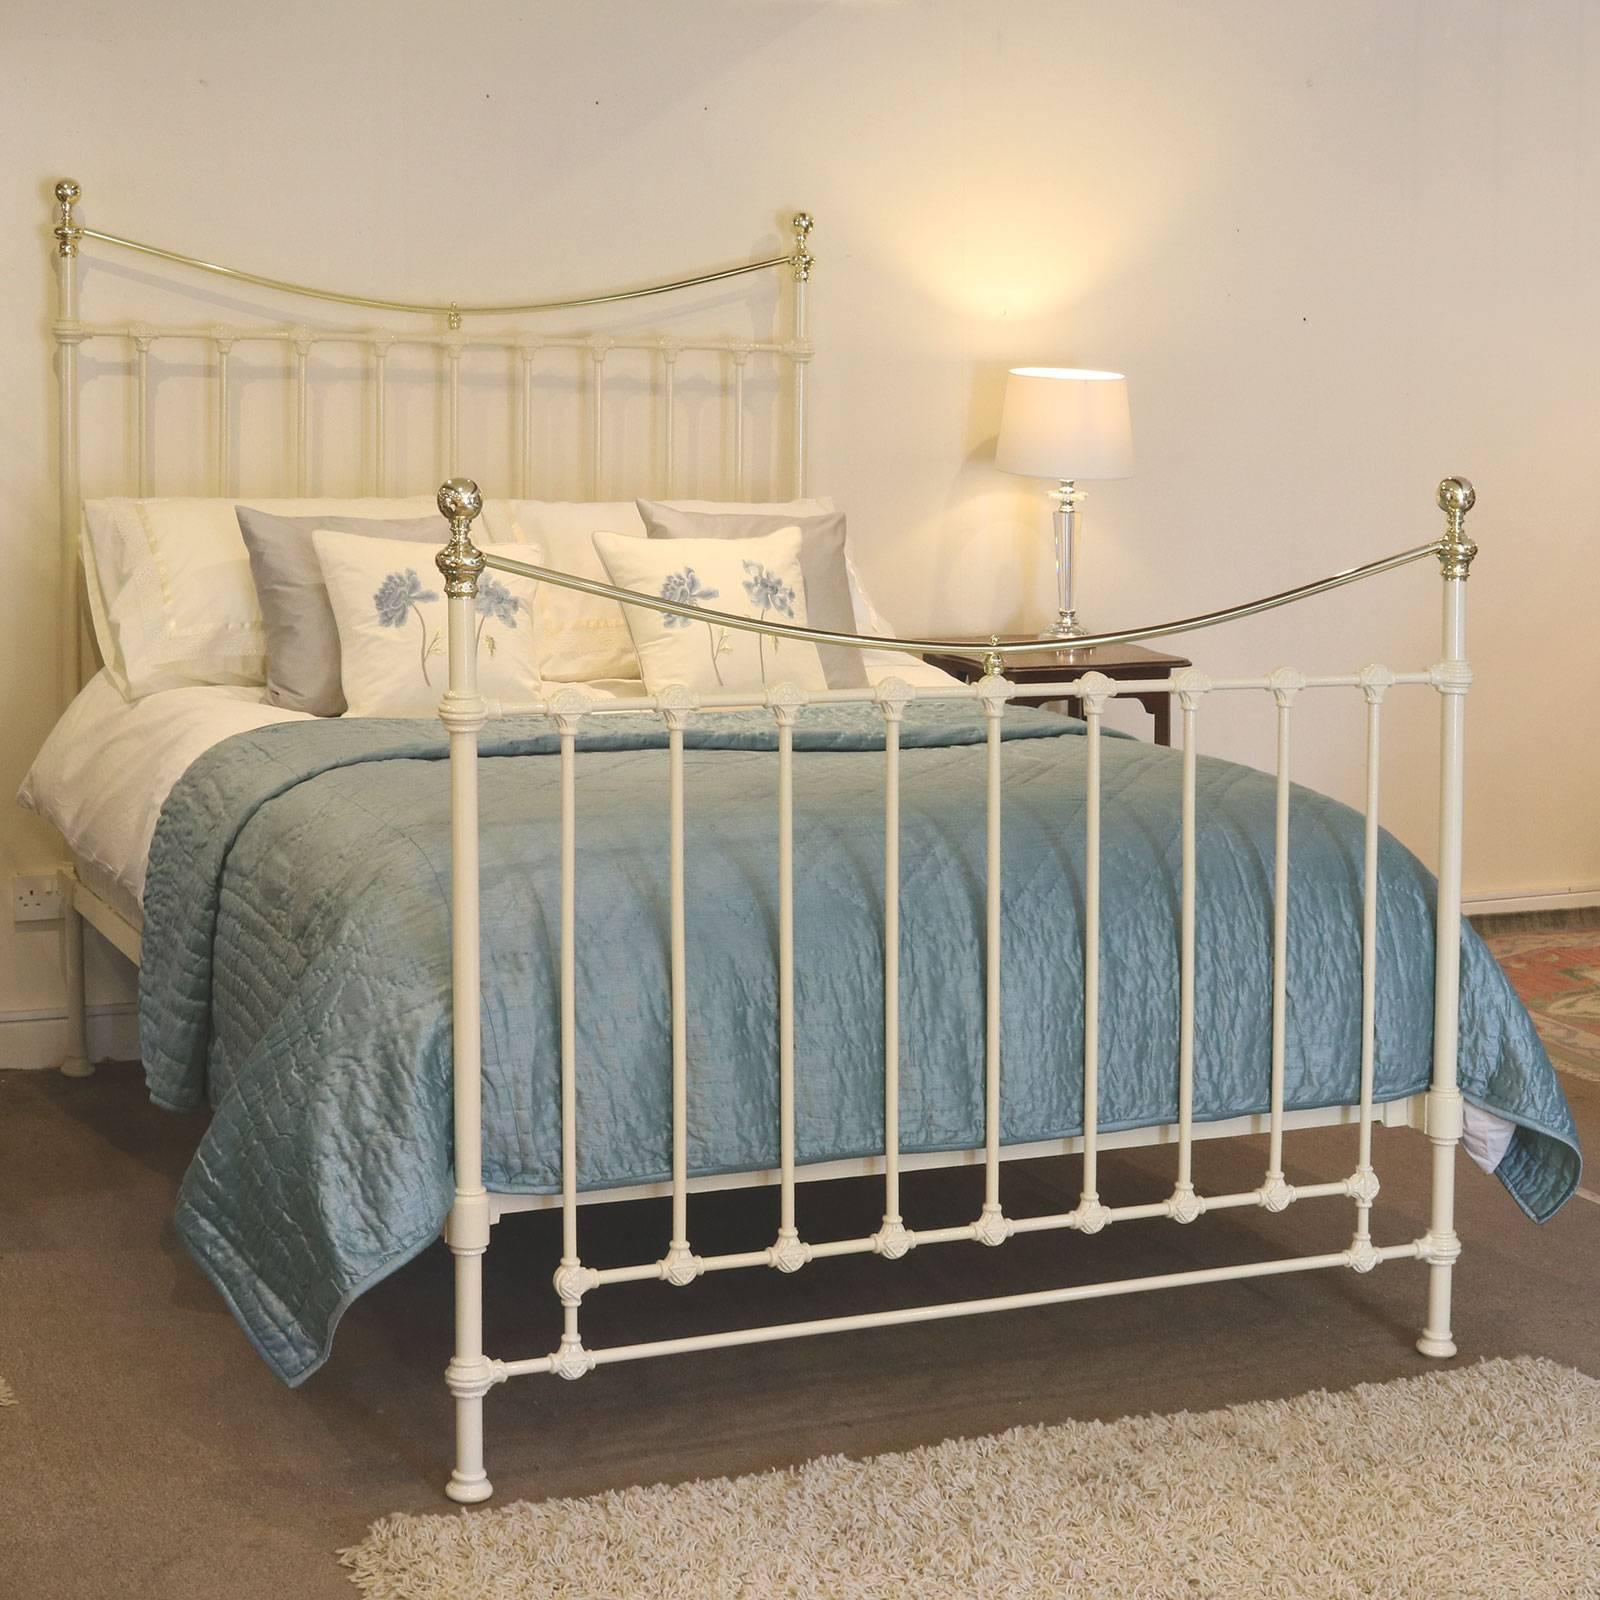 Brass and iron bed finished in cream with curved brass top rails and decorative castings. This bed is totally restored and adapted from an original antique frame.

This bed accepts a British king-size or American queen-size (60 inches, 5ft or